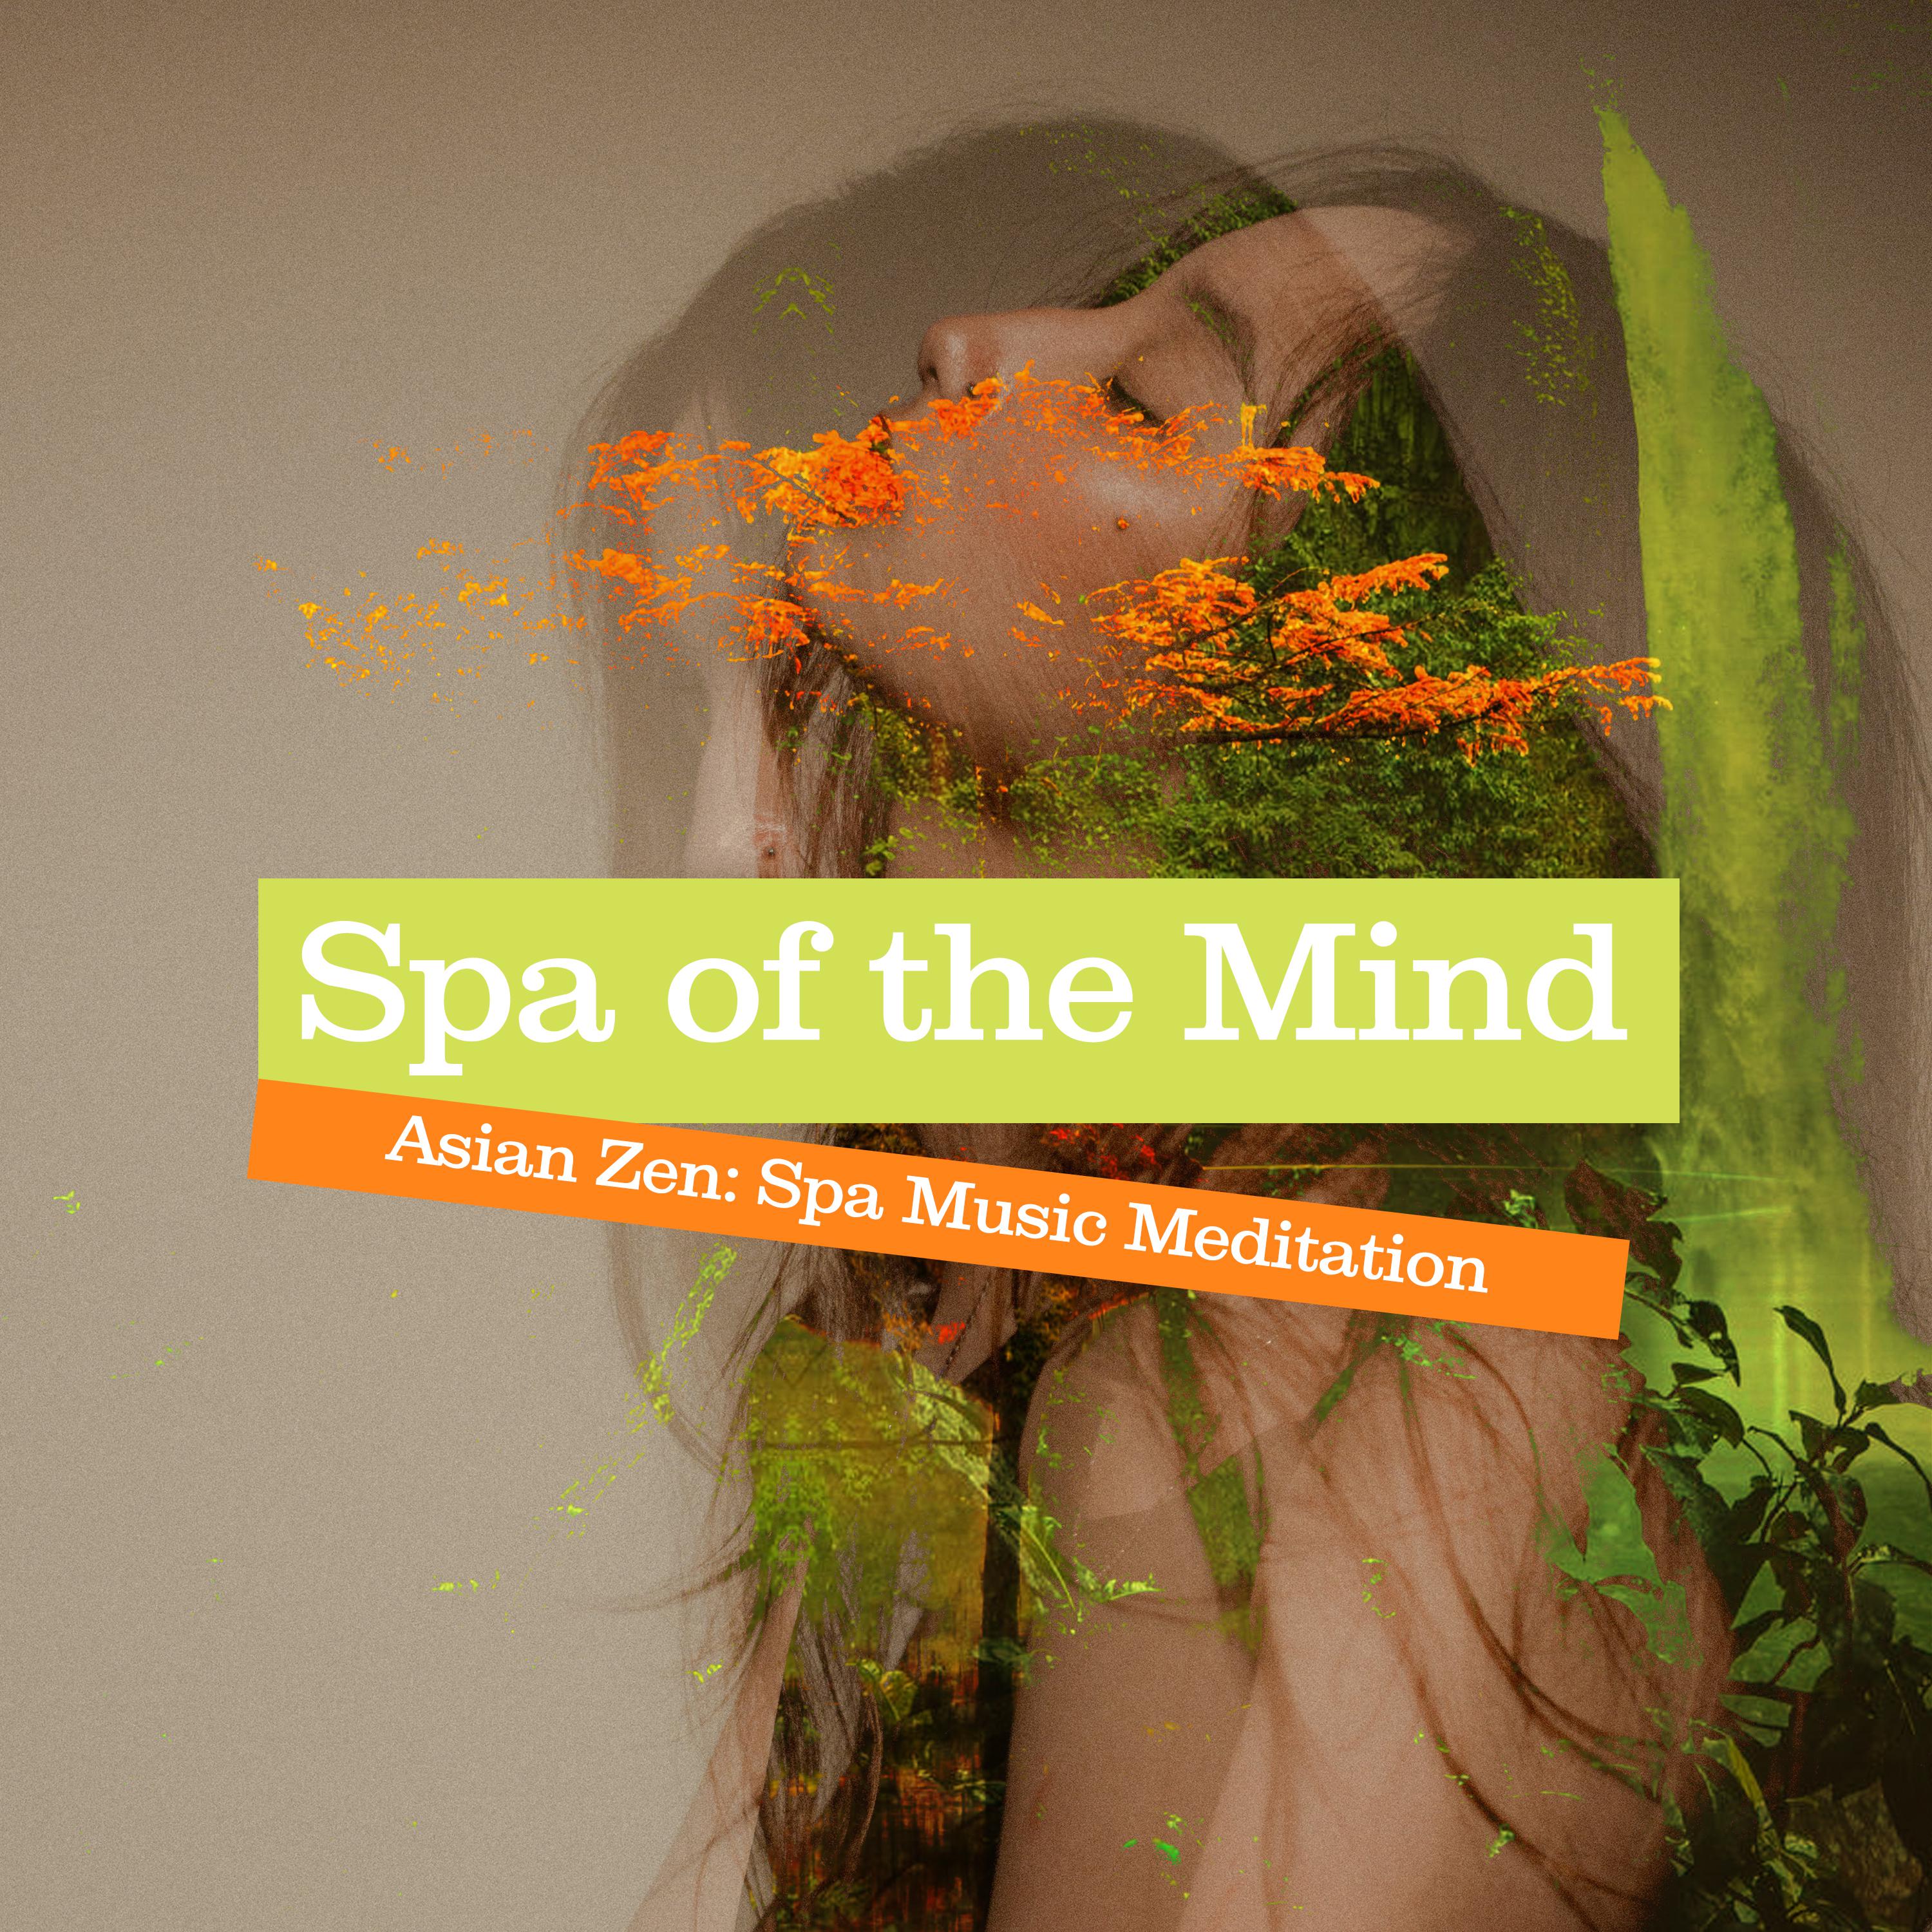 Spa of the Mind